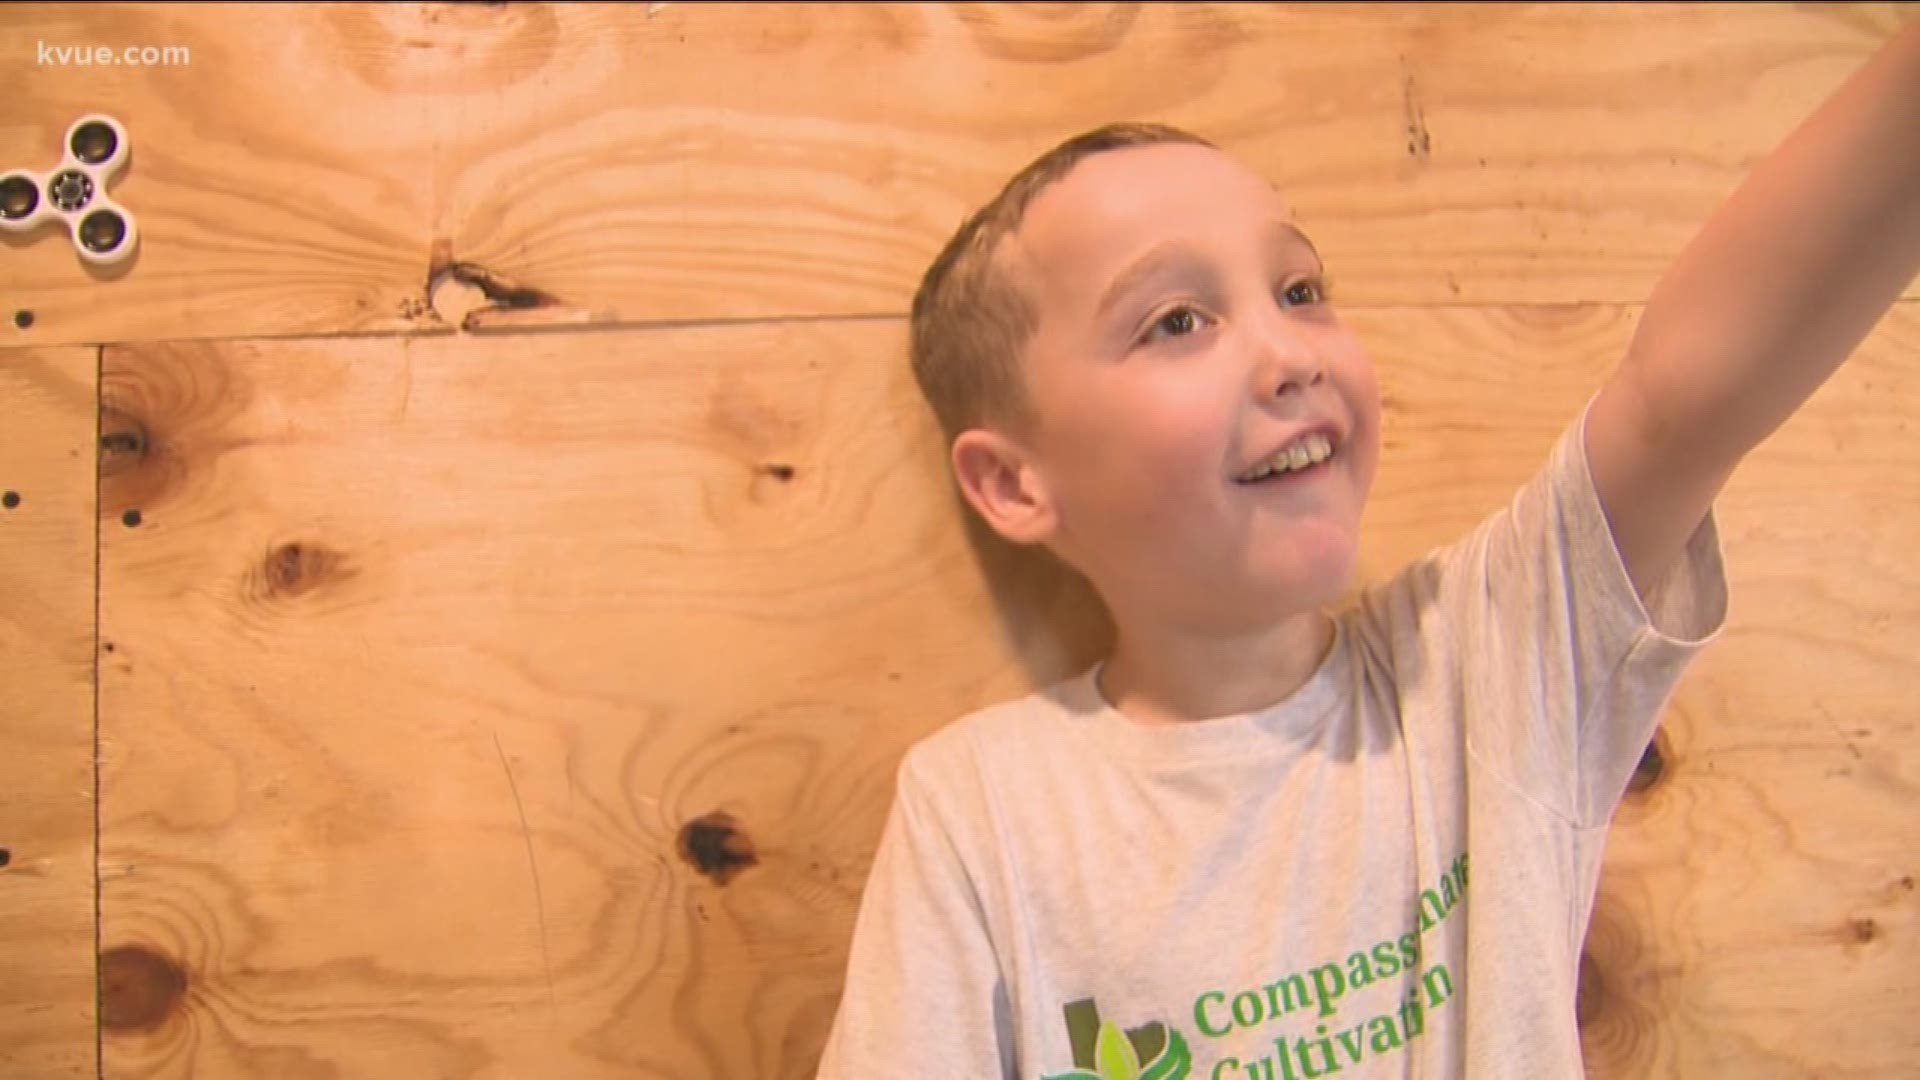 KVUE's Leslie Adami brings us the story of a young boy from Lockhart, Texas, who is now seizure free thanks to CBD oil.